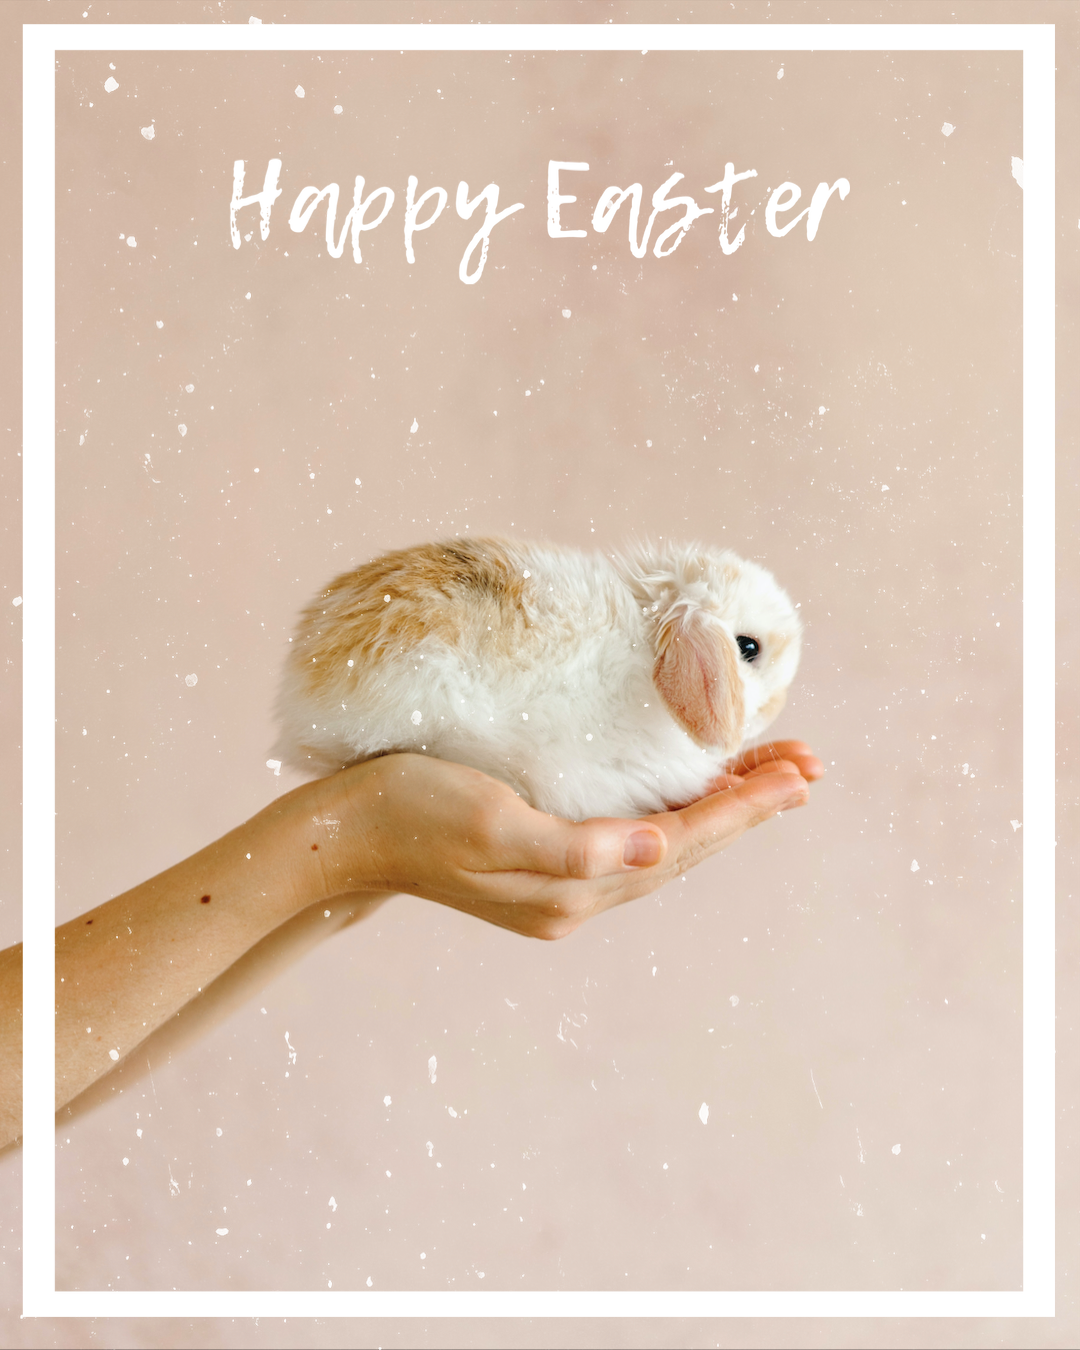 Cute rabbit happy easter wishes template